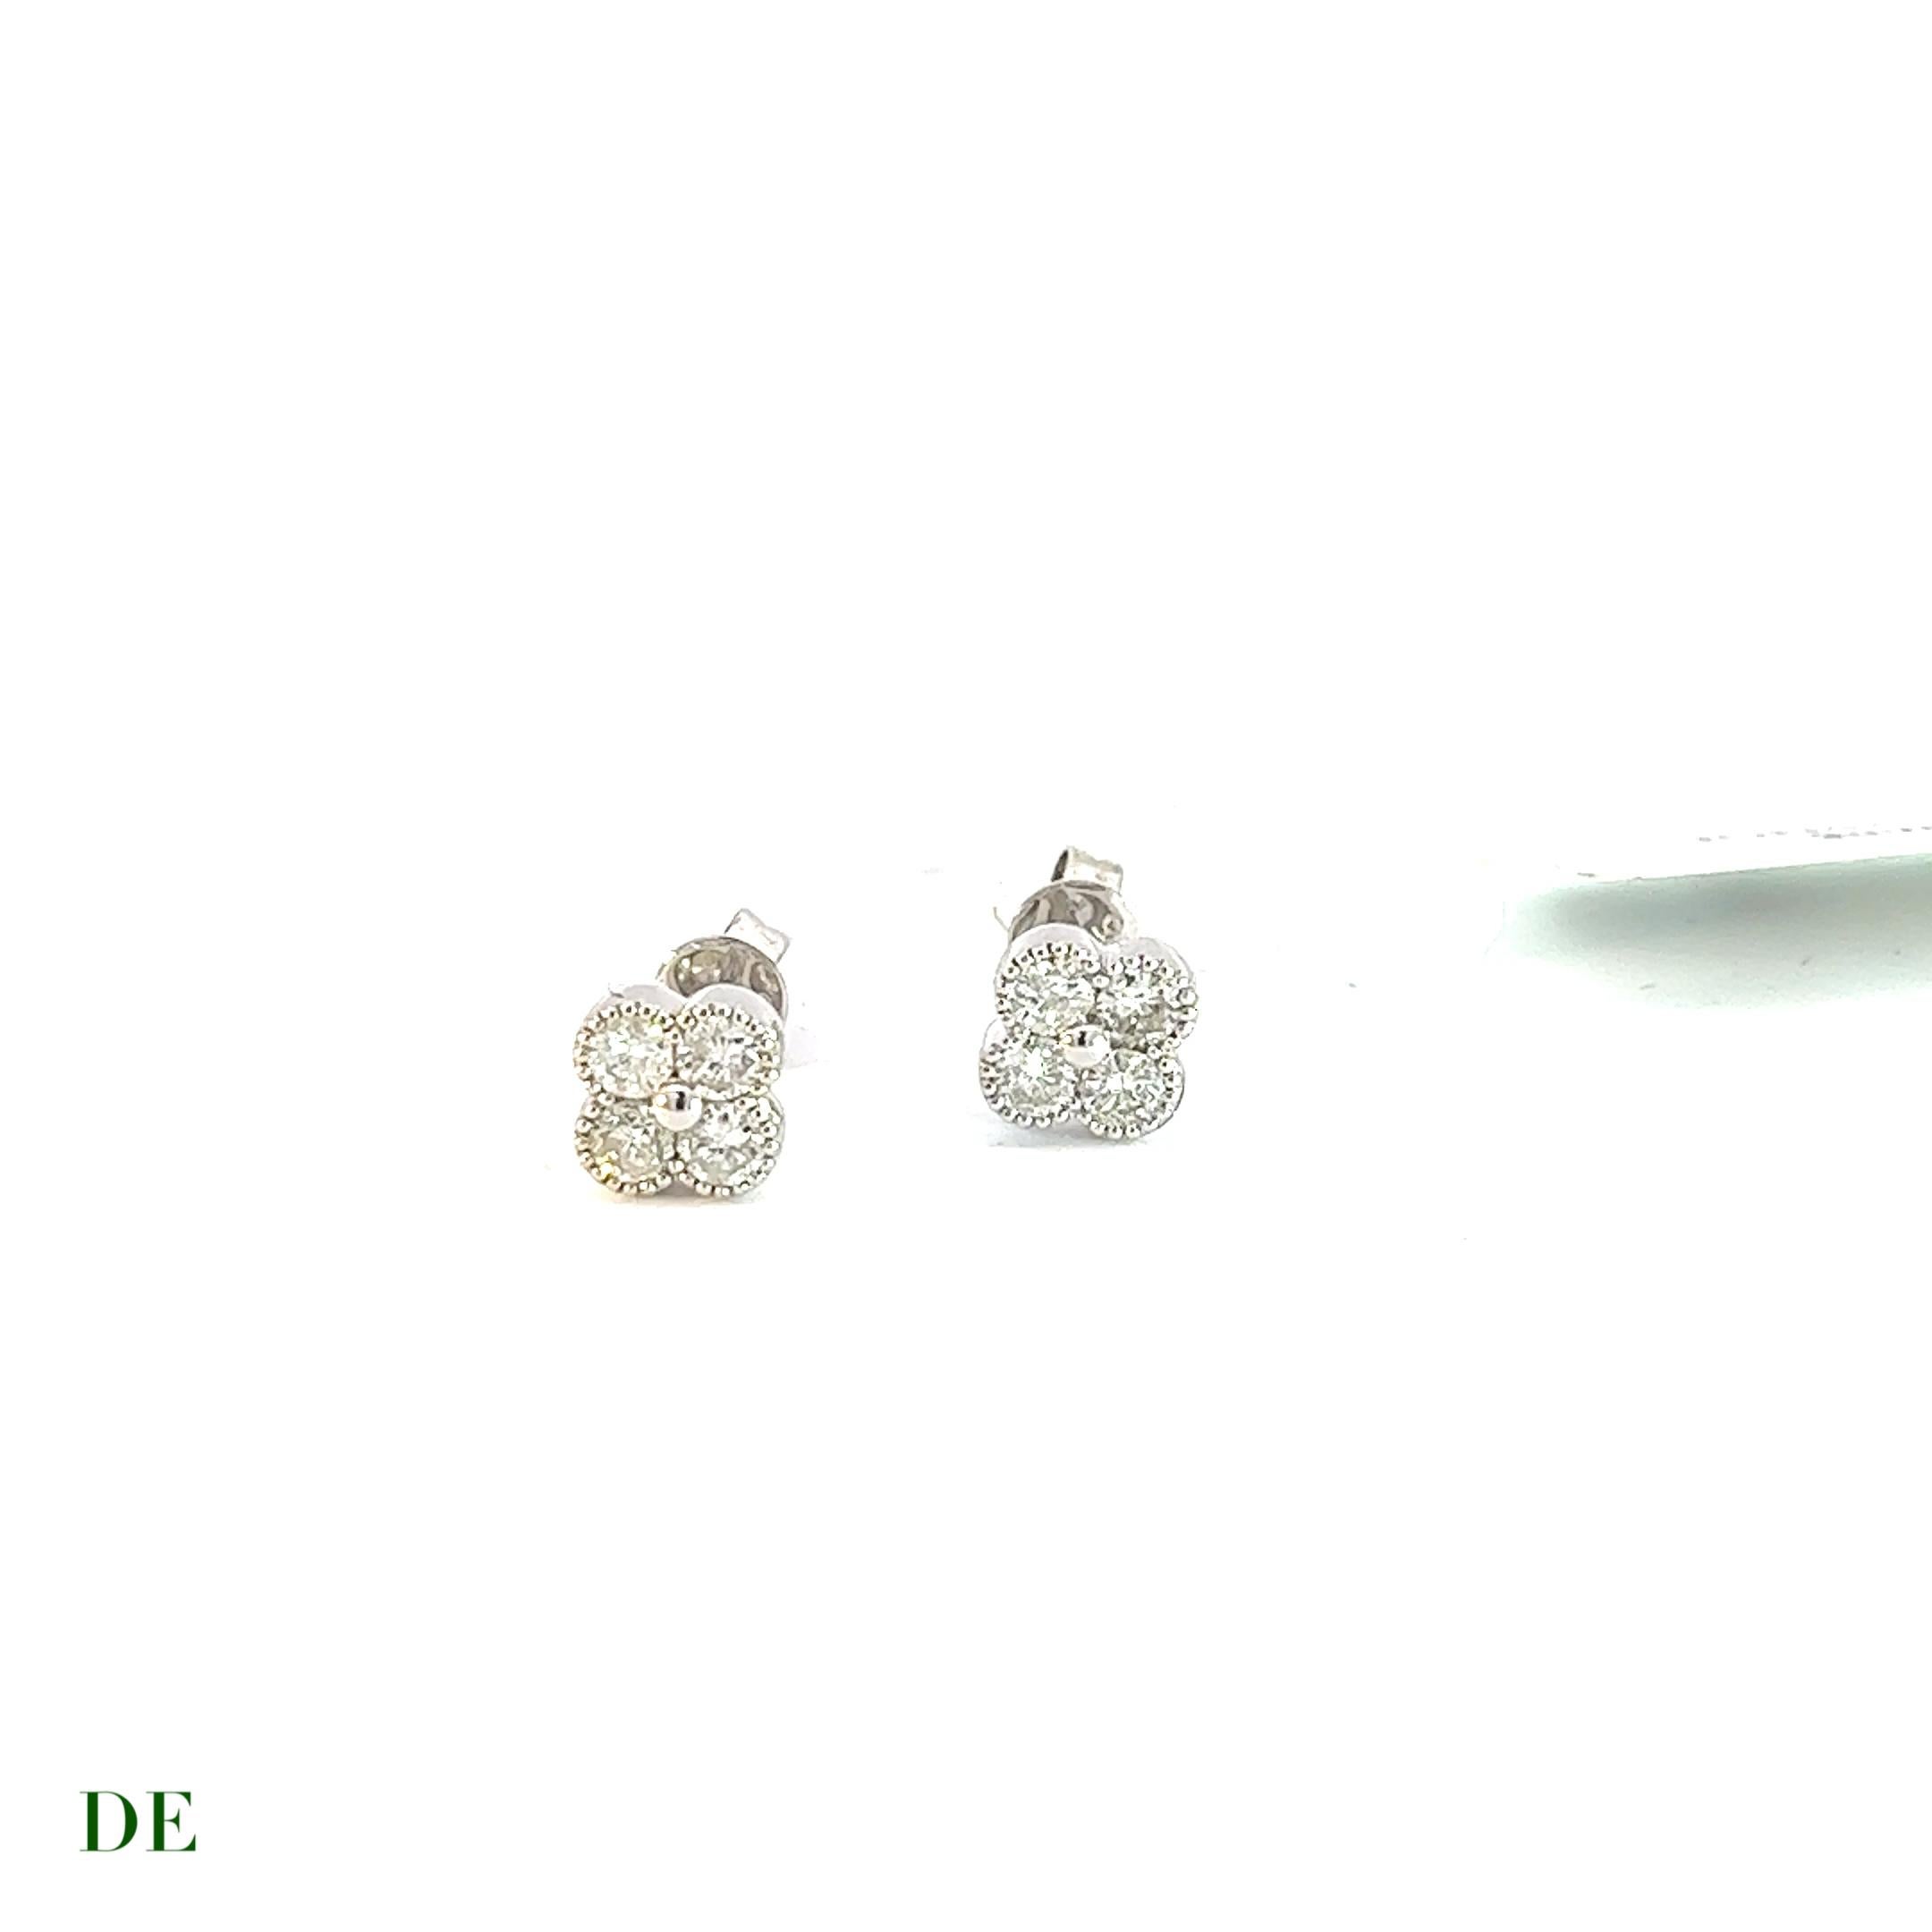 14k white gold with .67 Carat Four Leafs Clover Lucky White Diamond Earring

Introducing a pair of truly exquisite and enchanting earrings: the 14k White Gold with .67 Carat Four Leaf Clover Lucky White Diamond Earrings. These stunning earrings